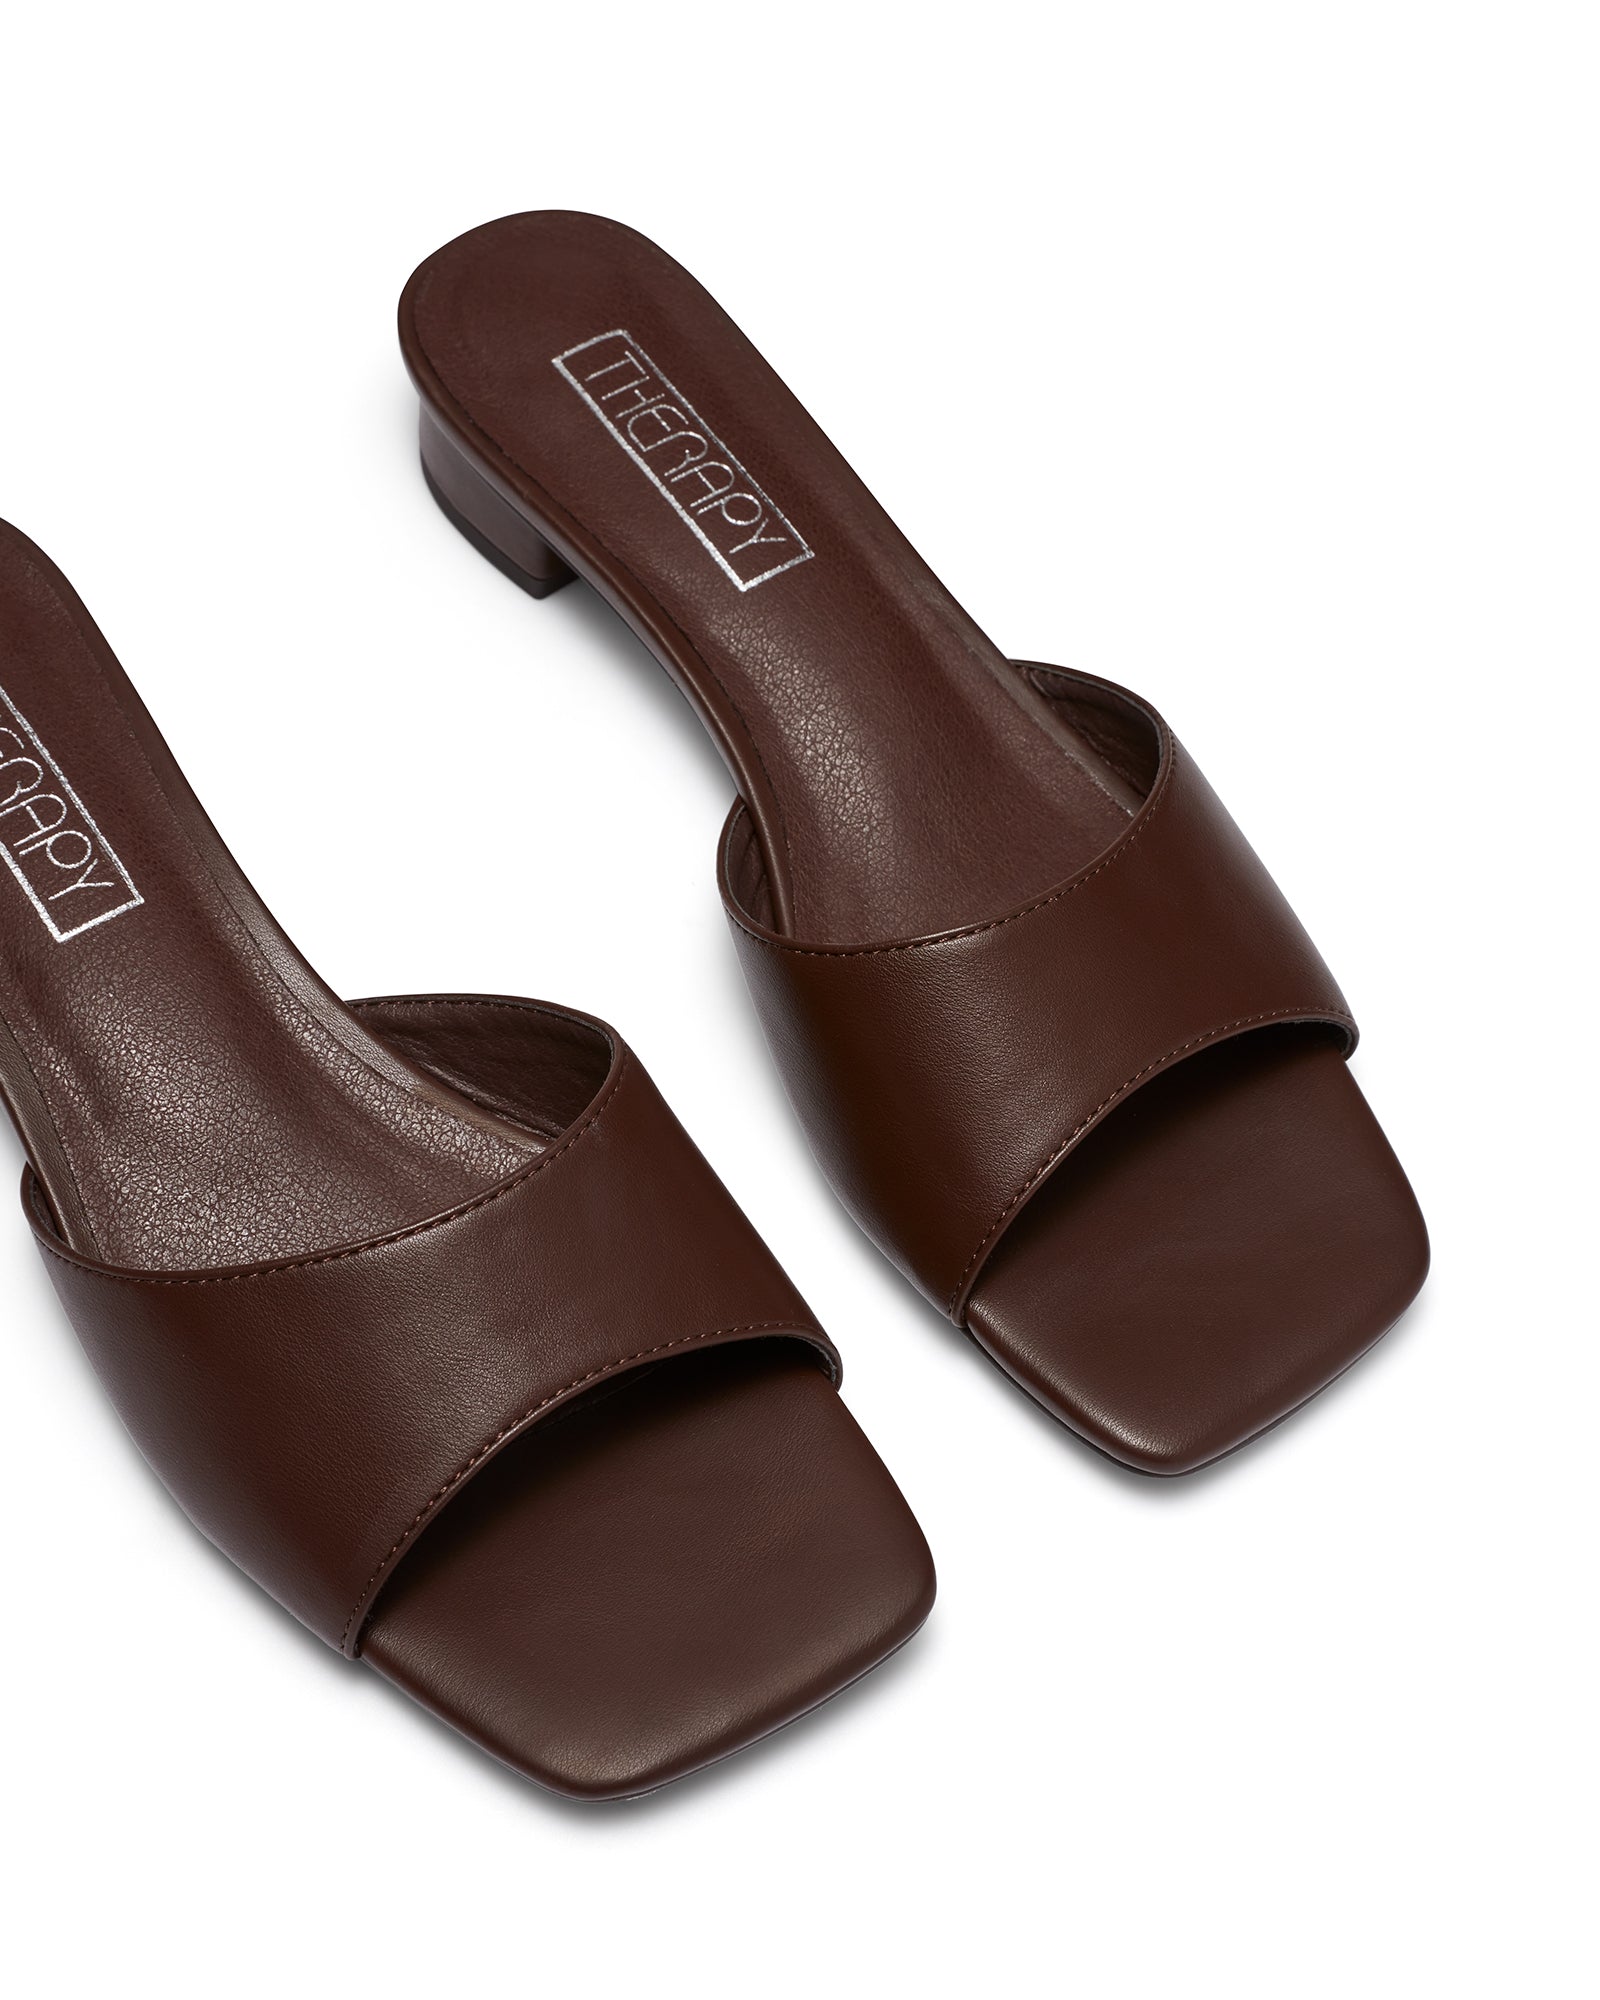 Therapy Shoes Debbie Chocolate | Women's Heels | Sandals | Mules | Slide